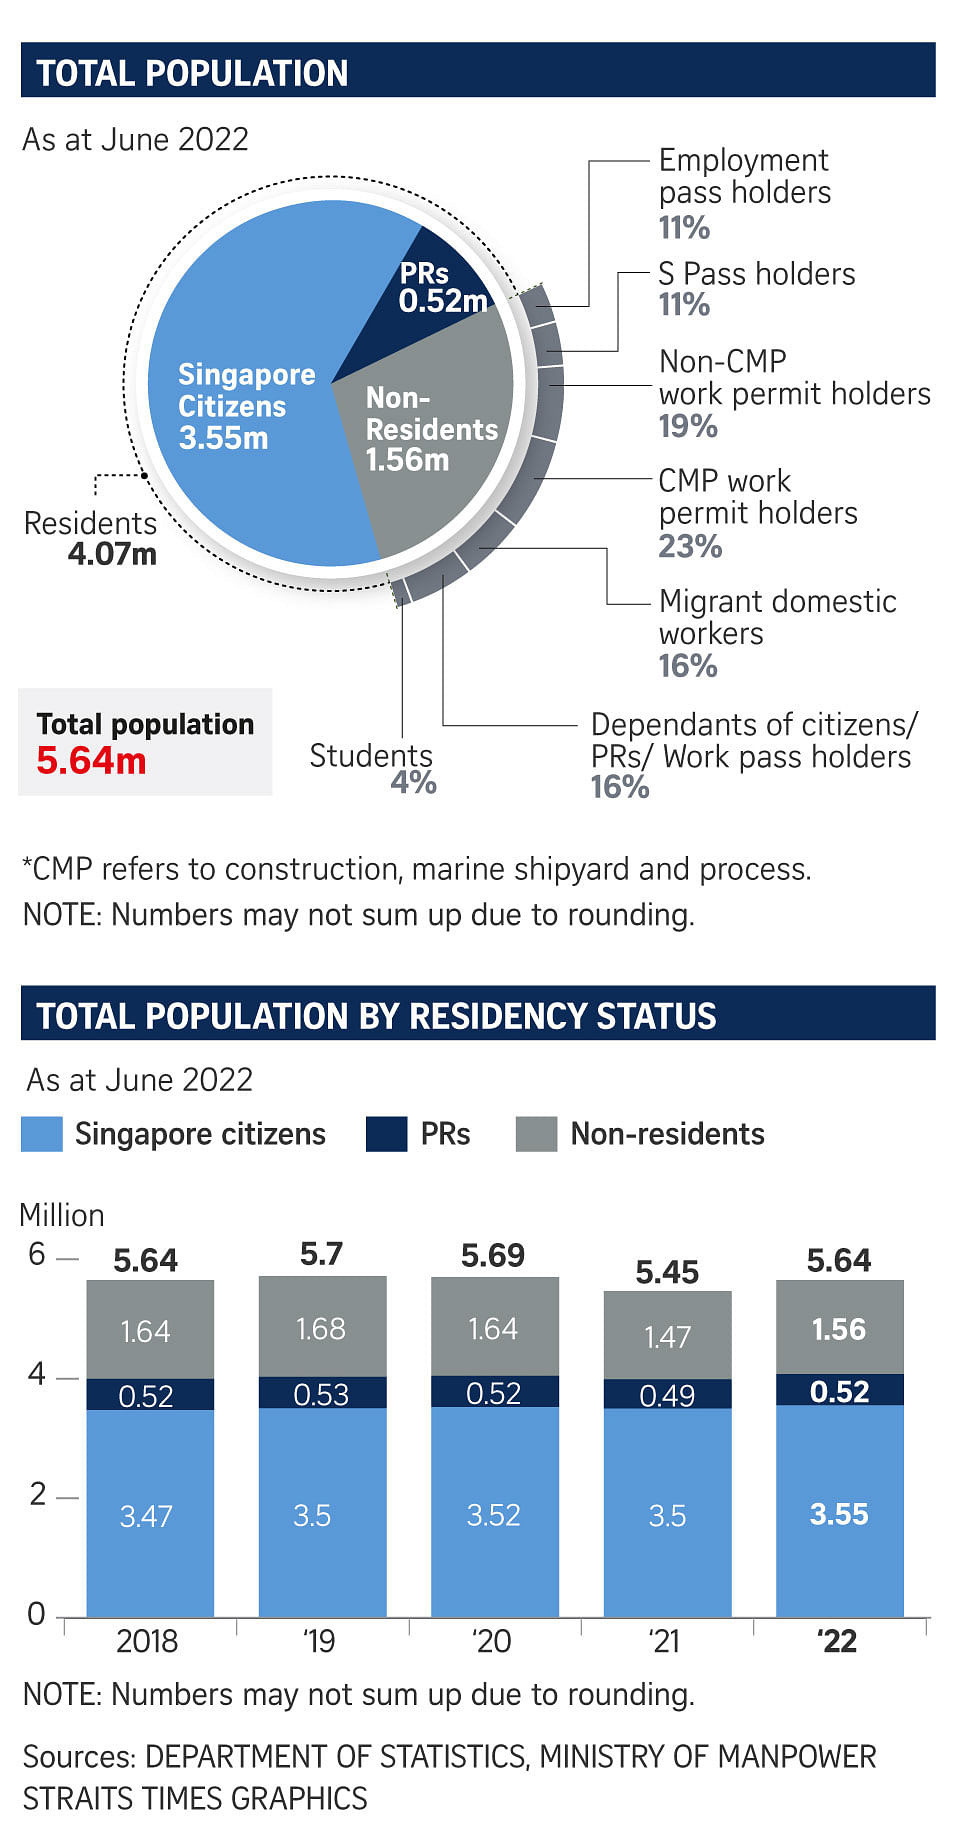 Singapore population grows 3.4 to 5.64m, reversing 2 consecutive years